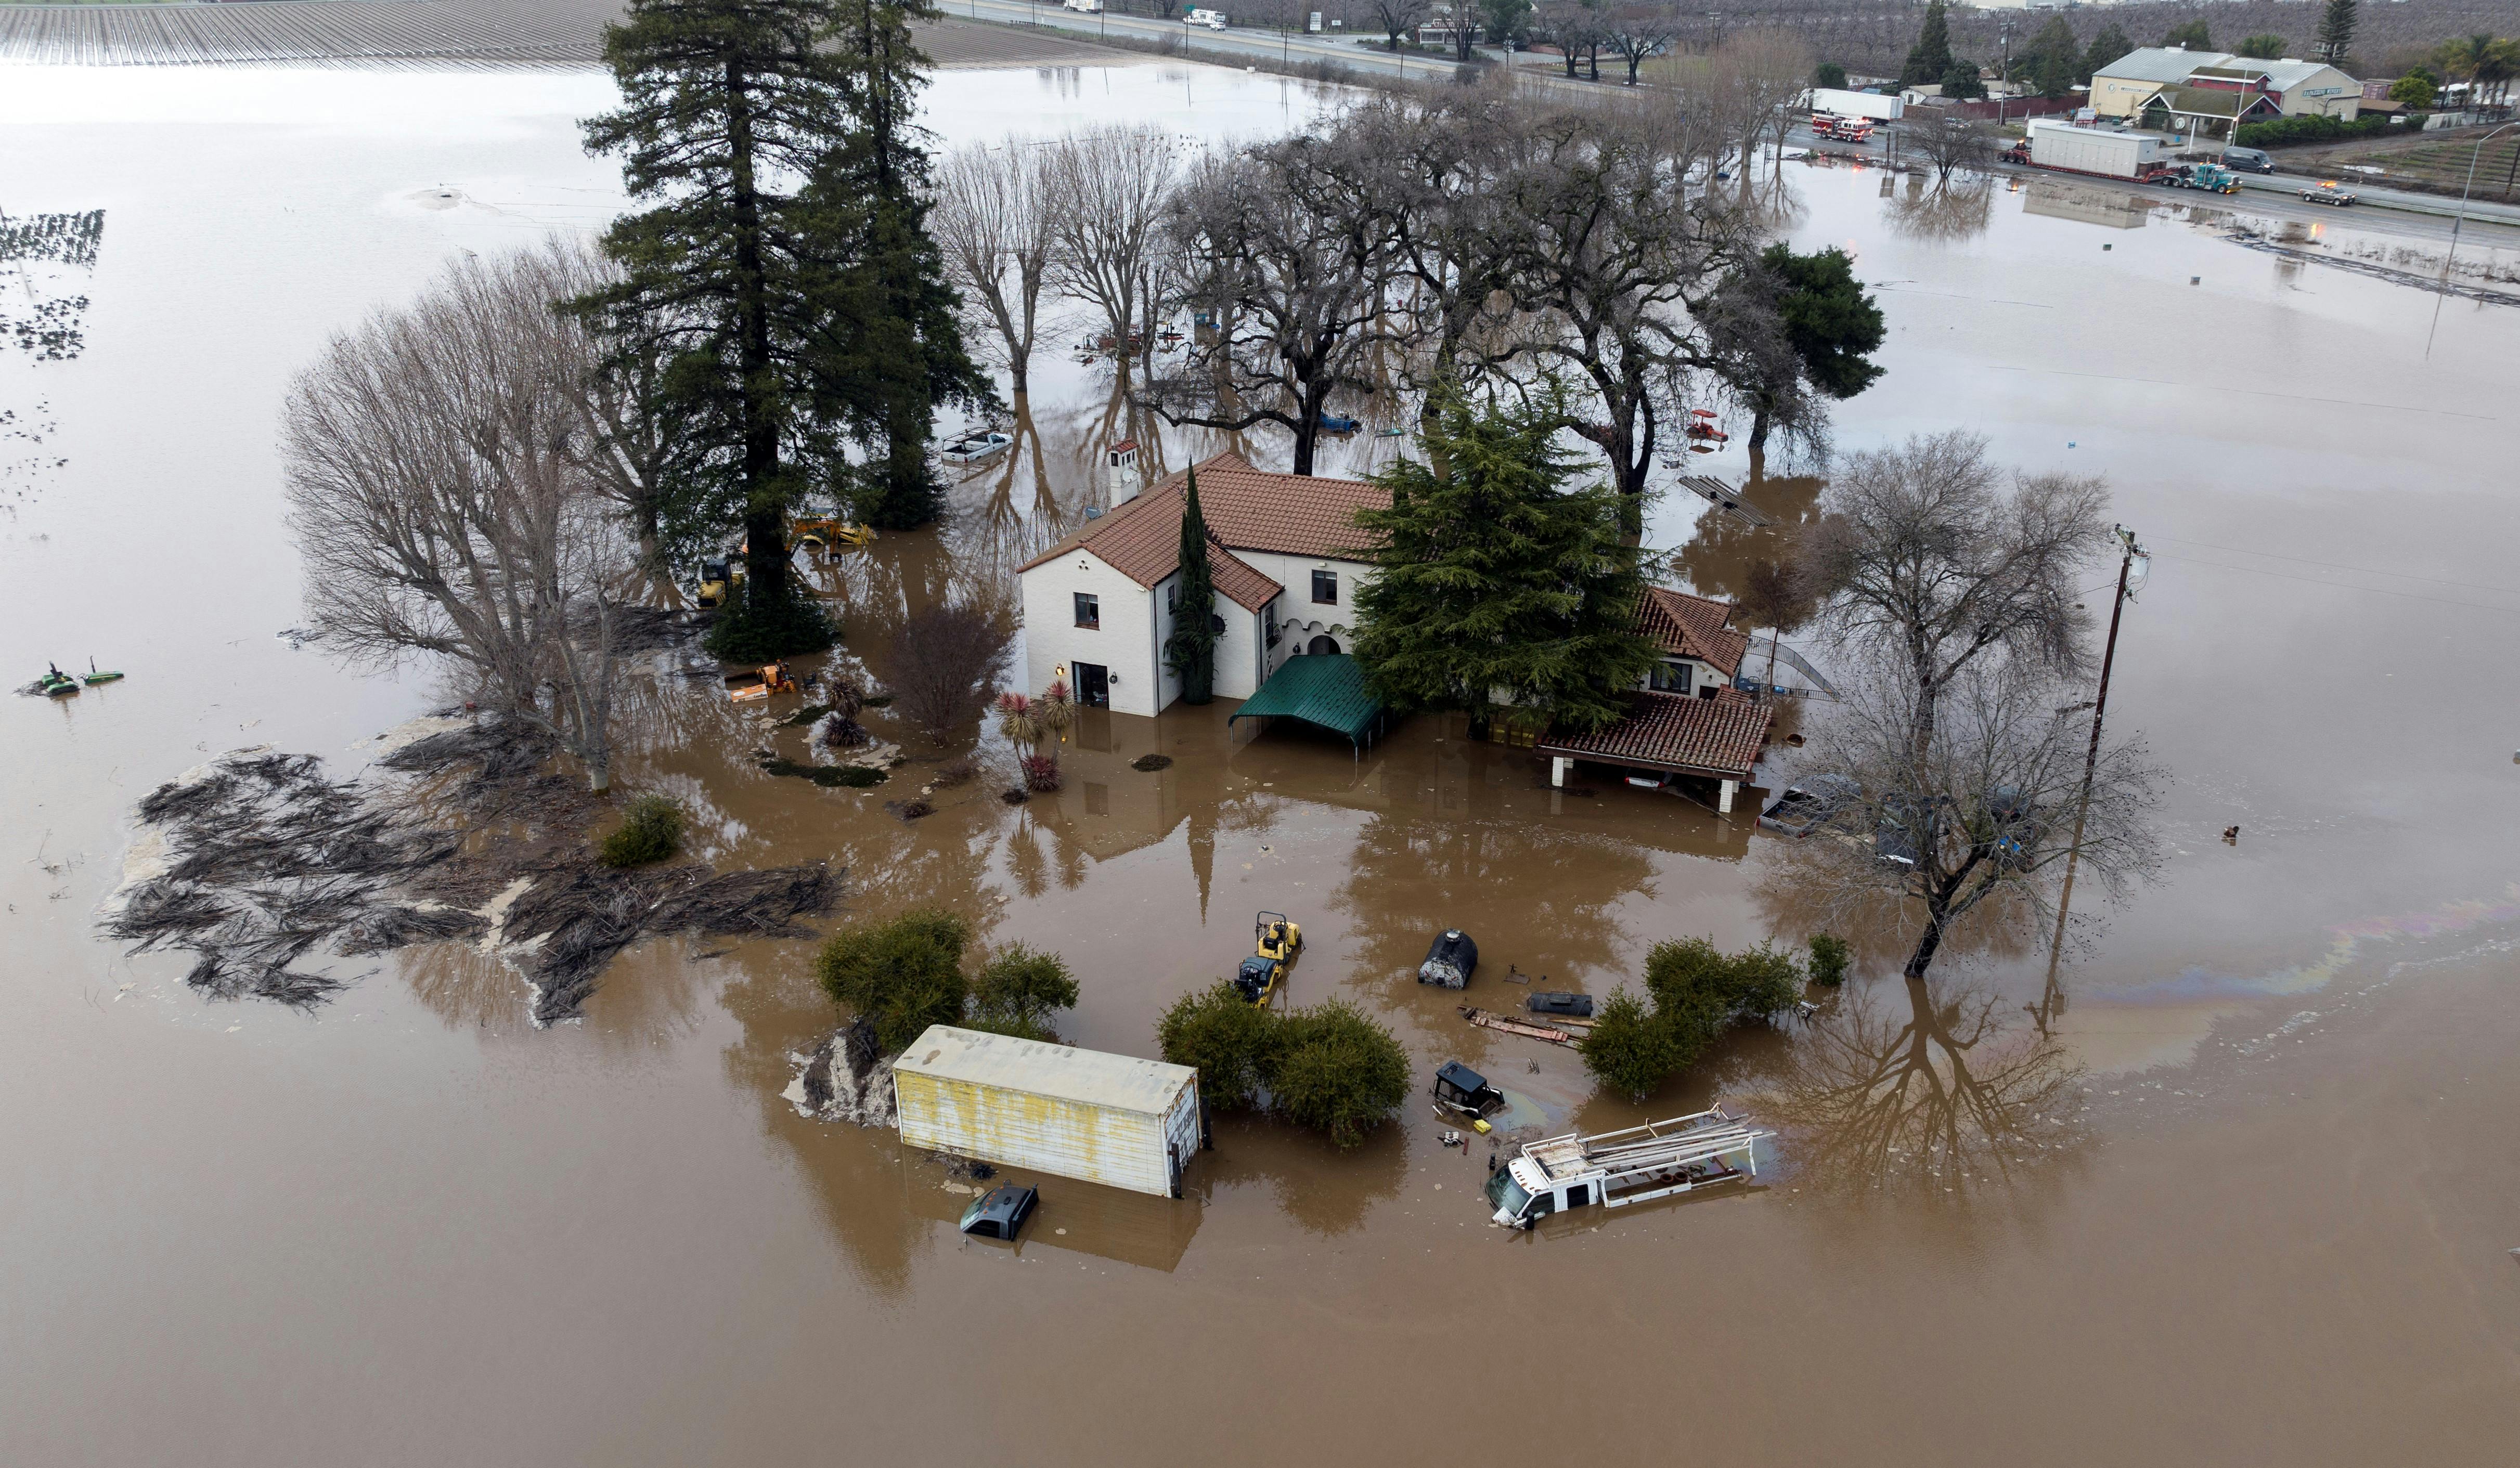 A home, several vehicles, and trees stand flooded with water all around them.